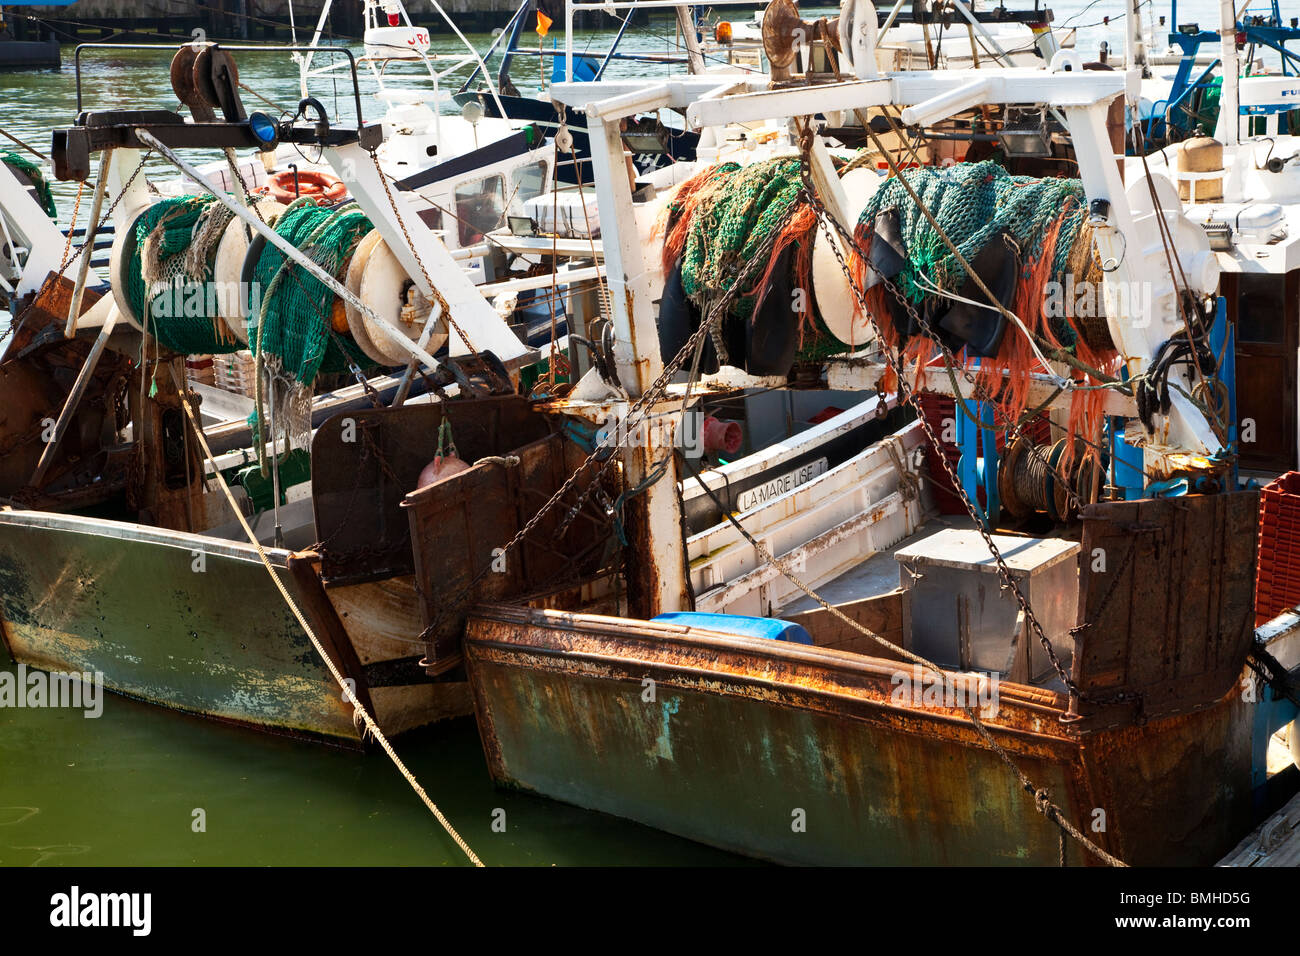 Fishing vessels in the port of Boulogne-sur-Mer in the Pas-de-Calais region of France Stock Photo